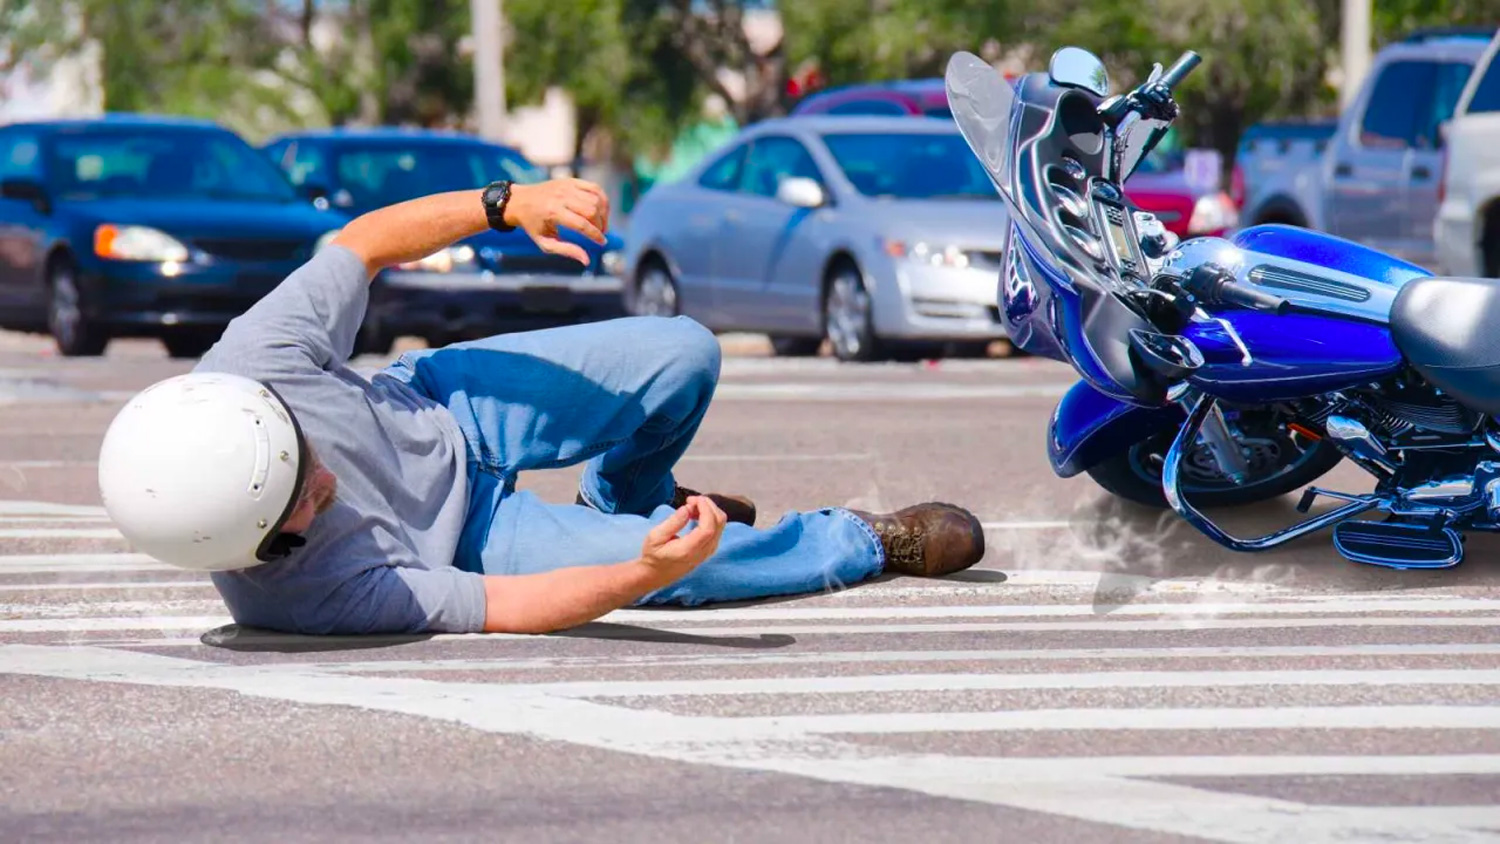 man falls off a motorcycle in an intersection on a busy road